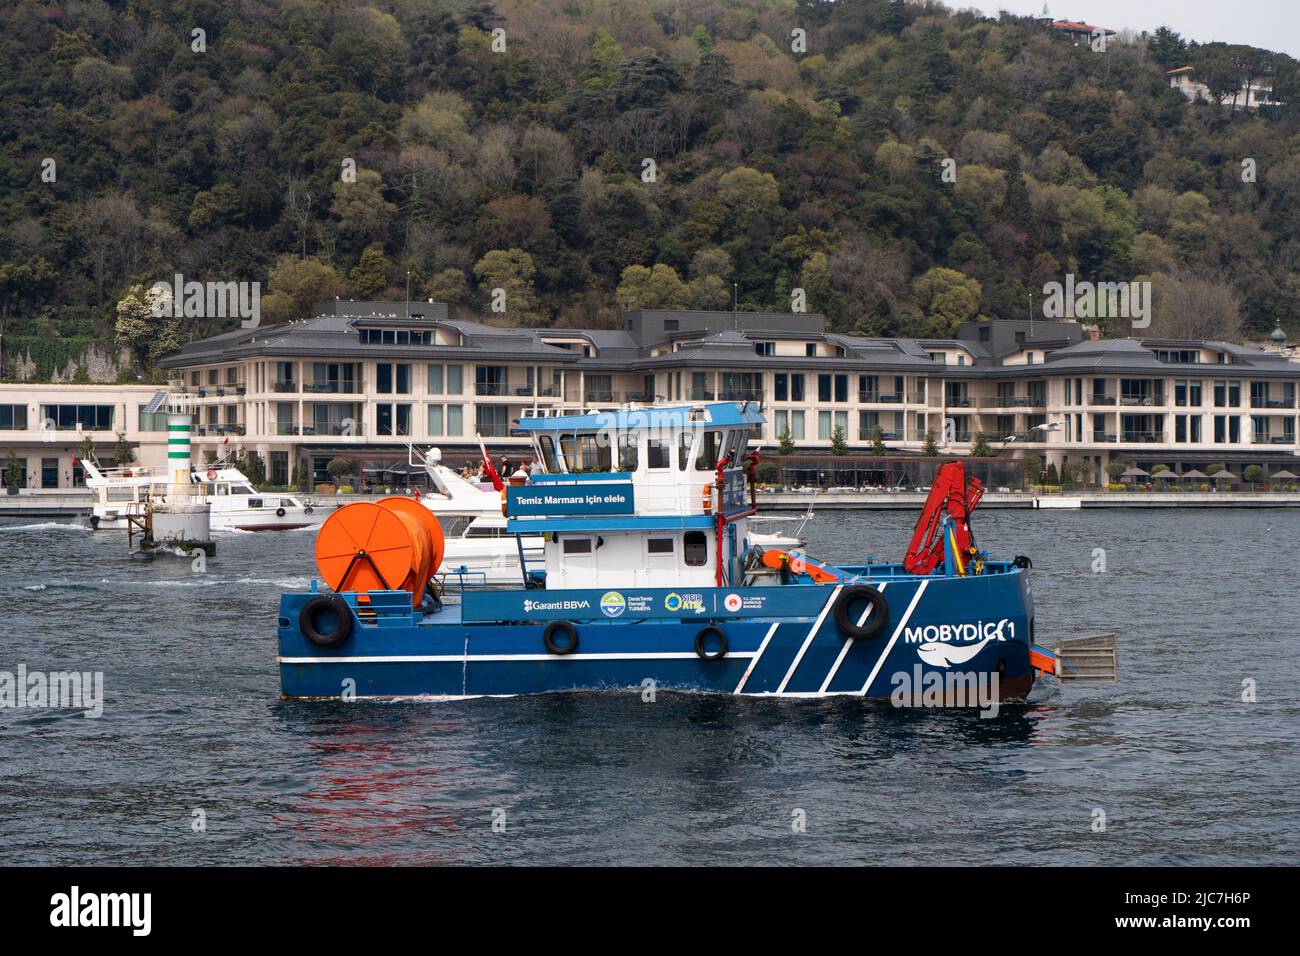 Sea Surface Cleaning Vessel called Mobidick on the Sea at Bosphorus Stock Photo